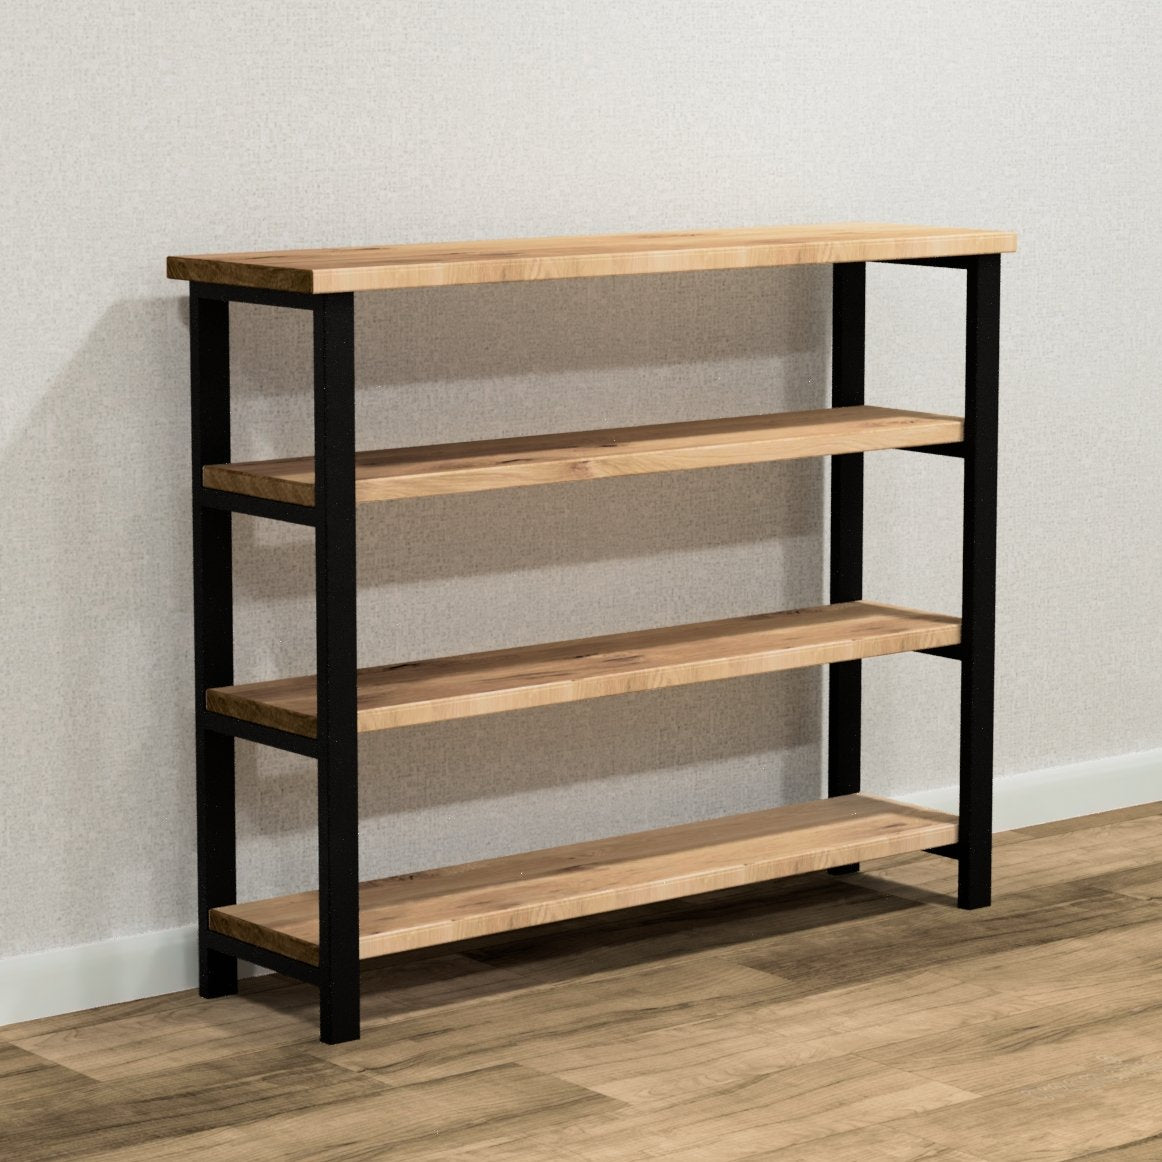 The Broadway Bookcase - FargoWoodworks